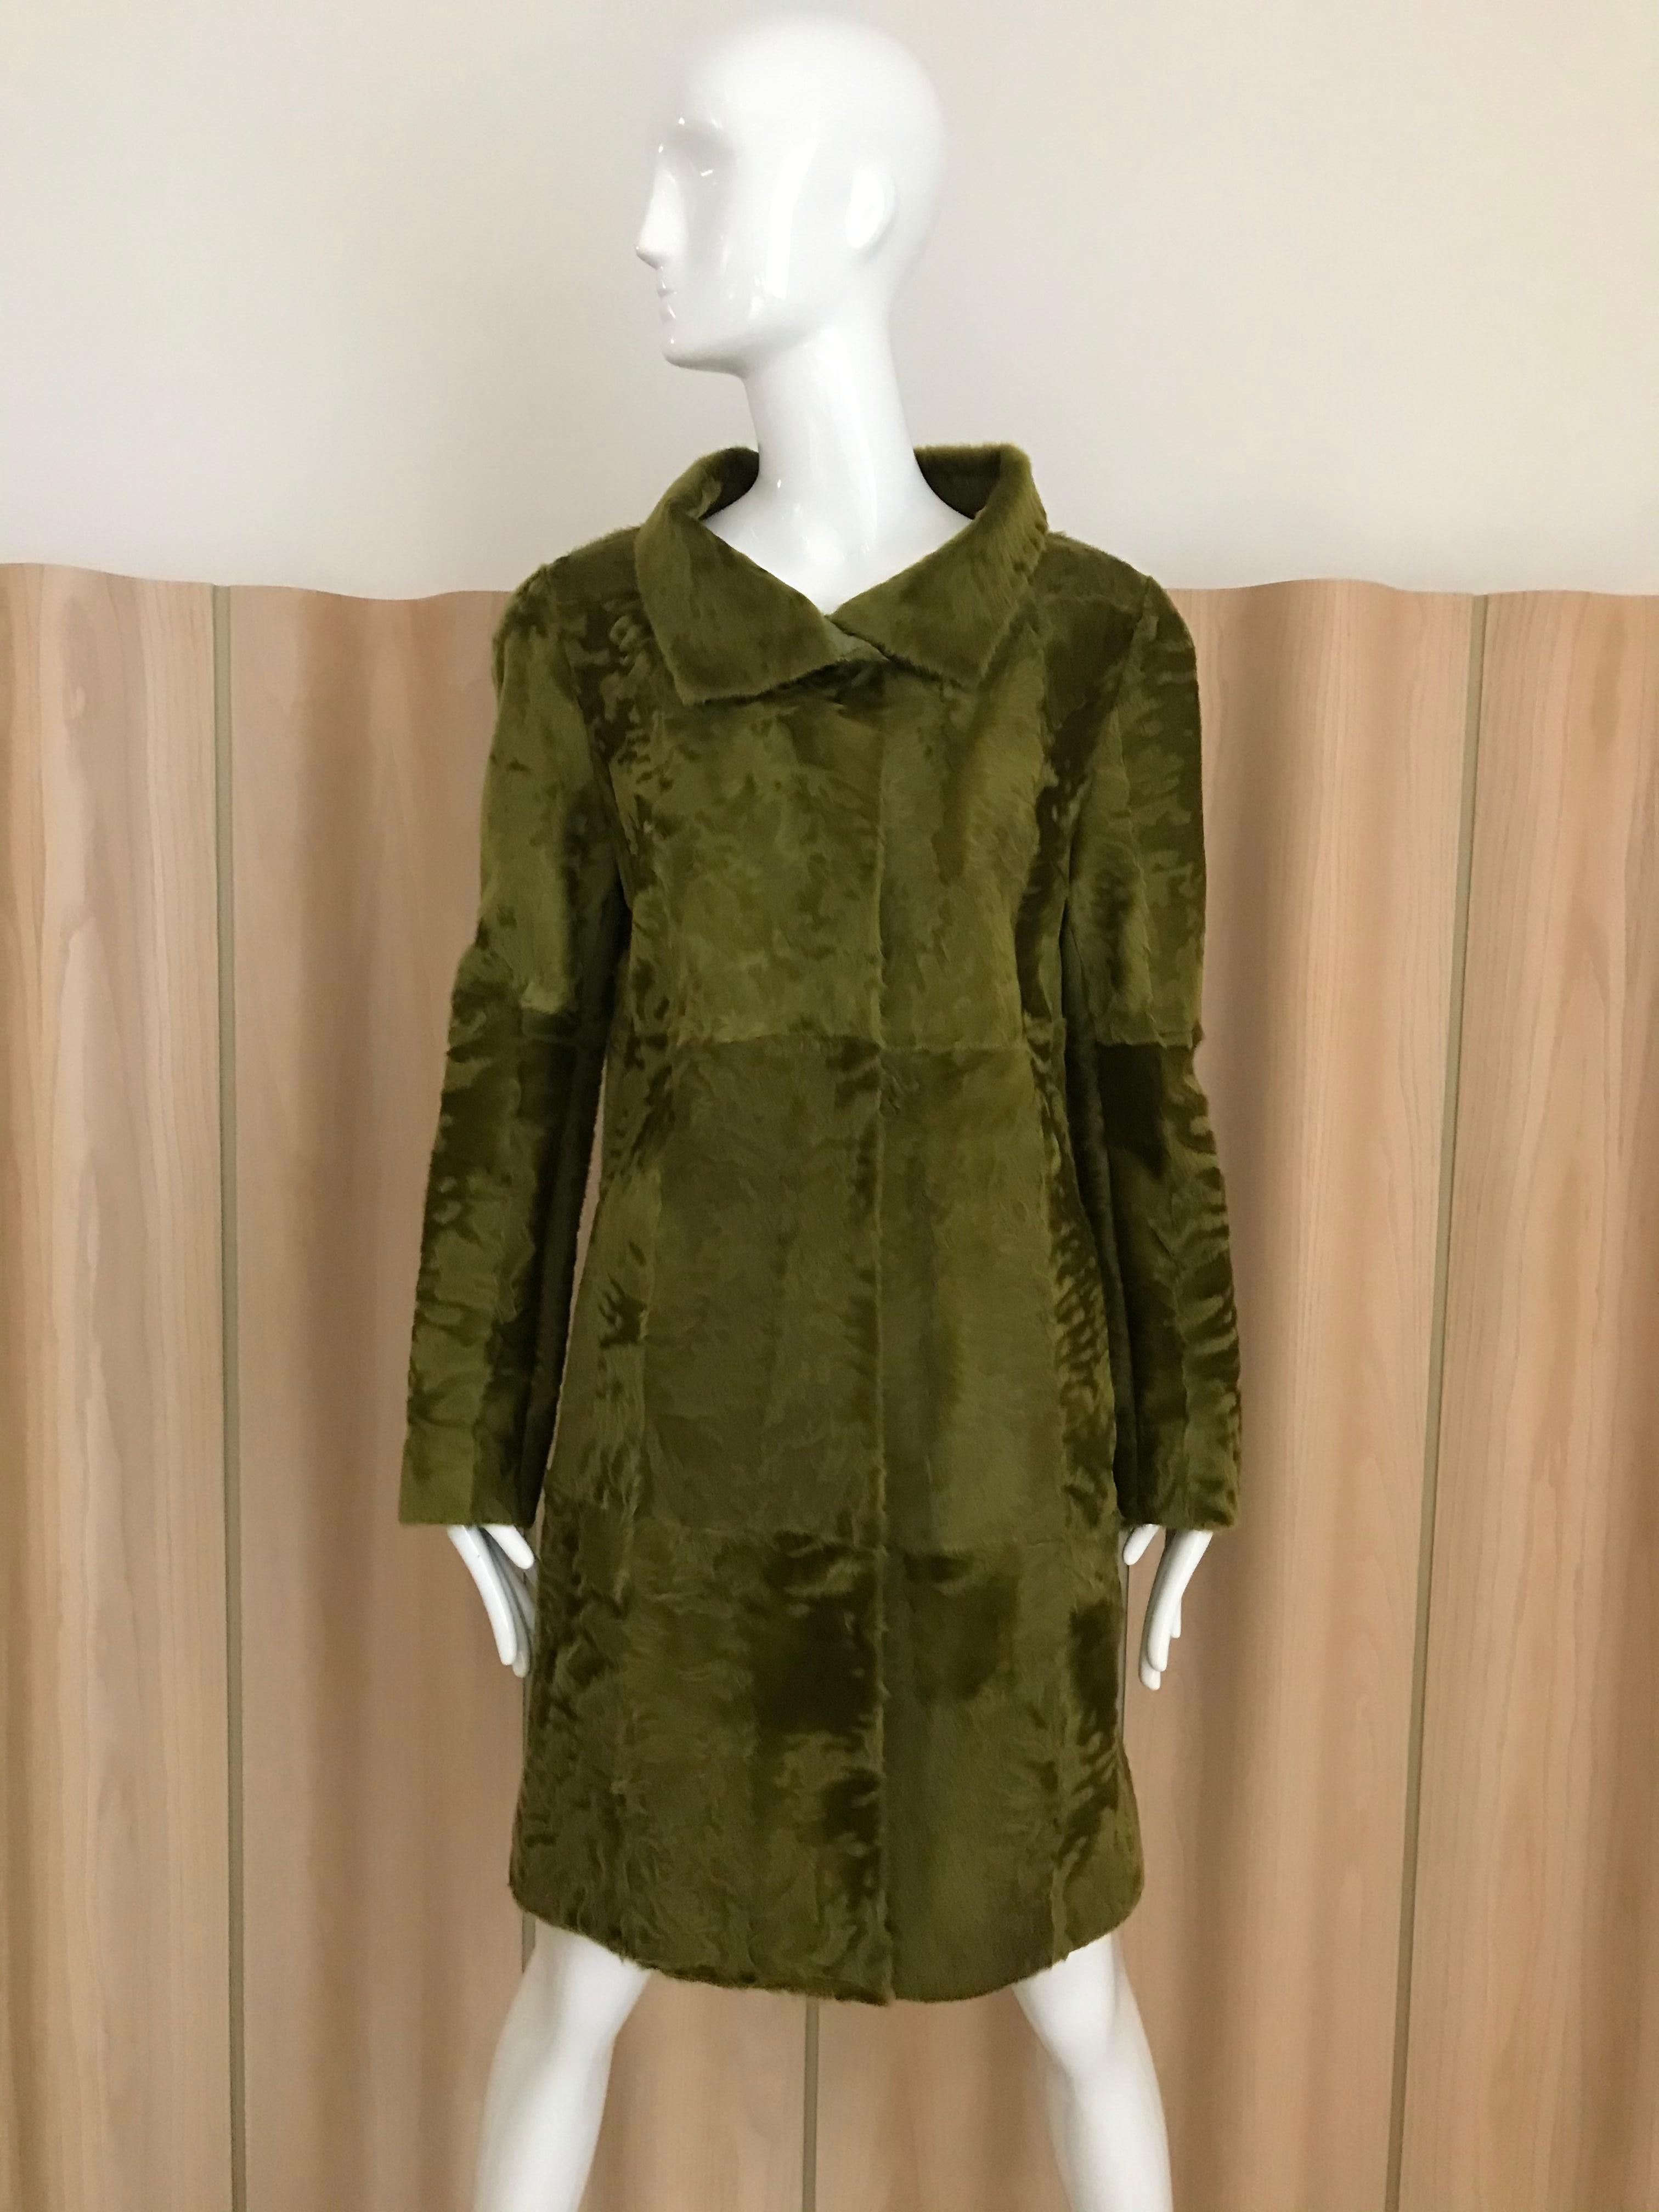 Beautiful Soft Green Lamb Skin Fur Coat.  The coat has a beautiful texture resulting from the naturally occurring “swirls” in the fur, giving it a sense of depth.  This is not a plain green lamb skin coat! Coat is in excellent condition.
Bust: 36